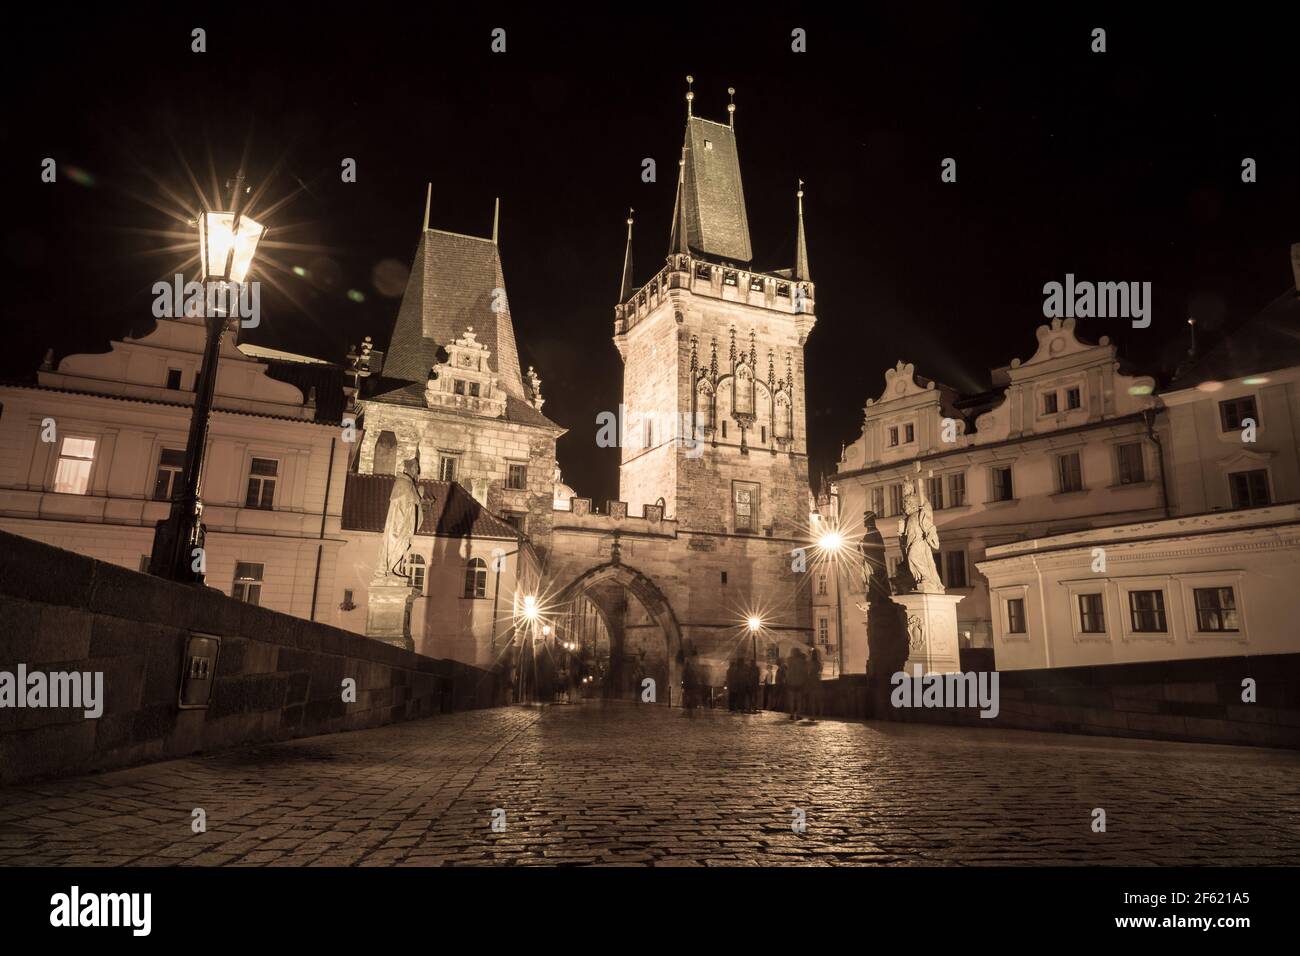 Czech Republic, Prague. Night view of the Charles Bridge in the style of an old photo Stock Photo